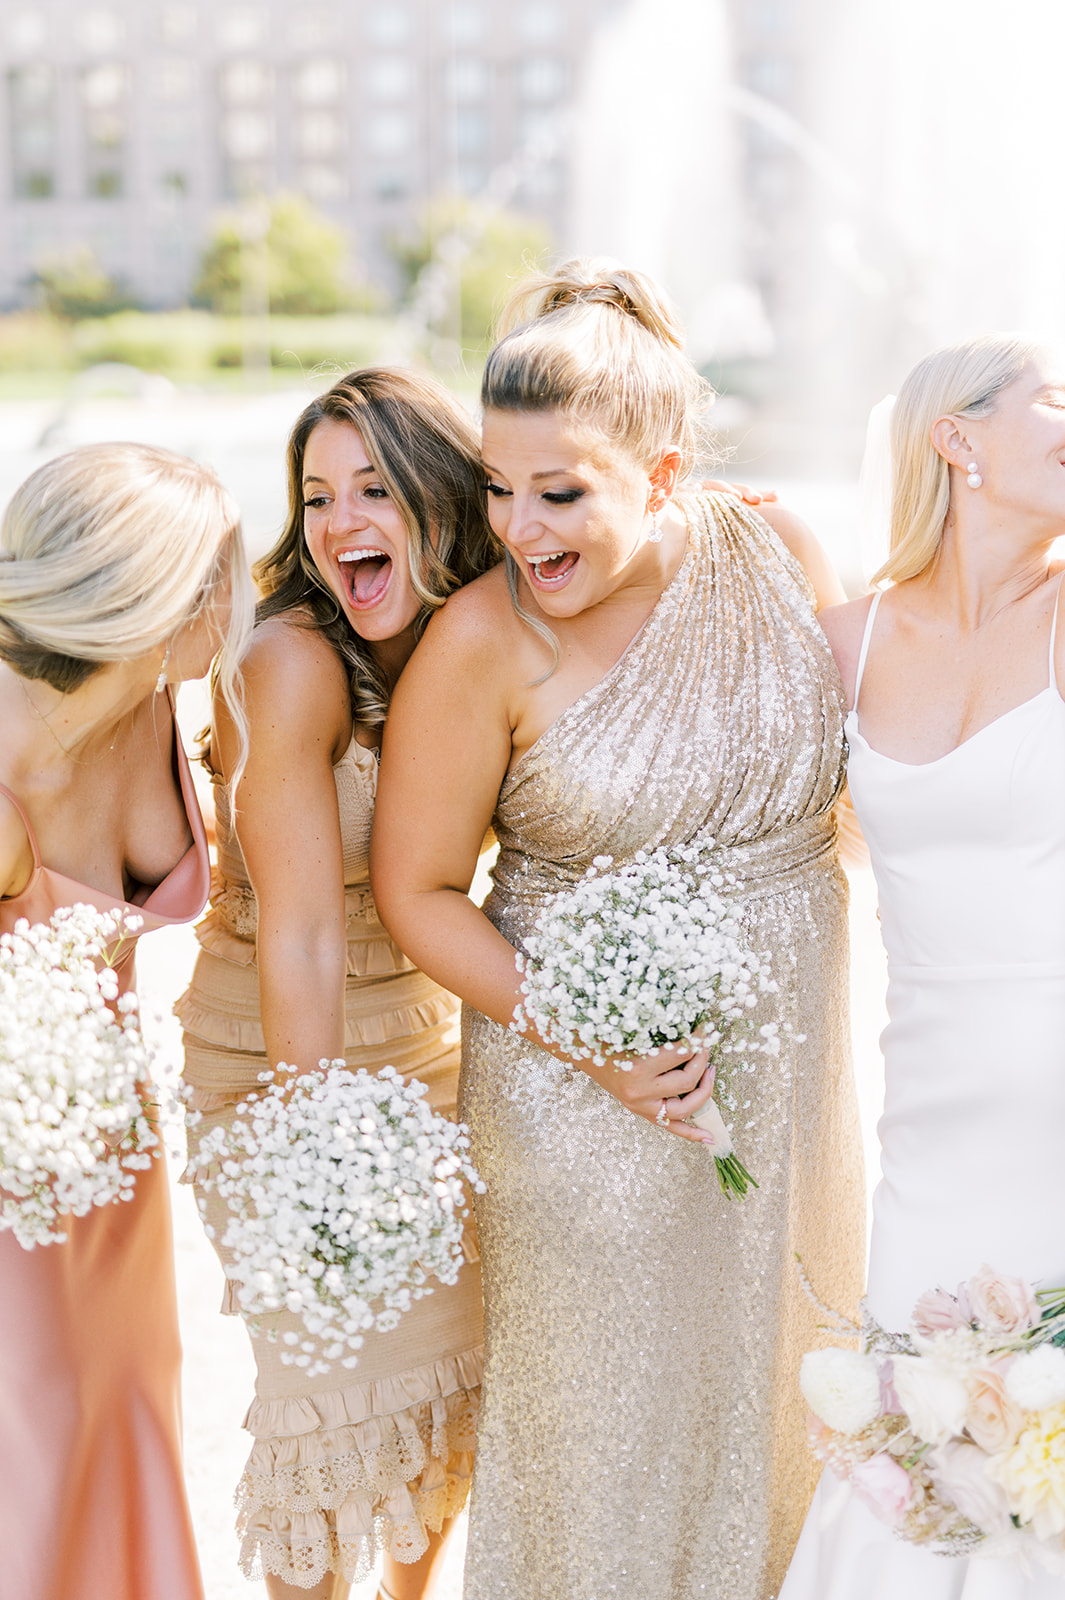 bridesmaids in chic champagne gowns laugh on a sunny wedding day in Philadelphia, PA